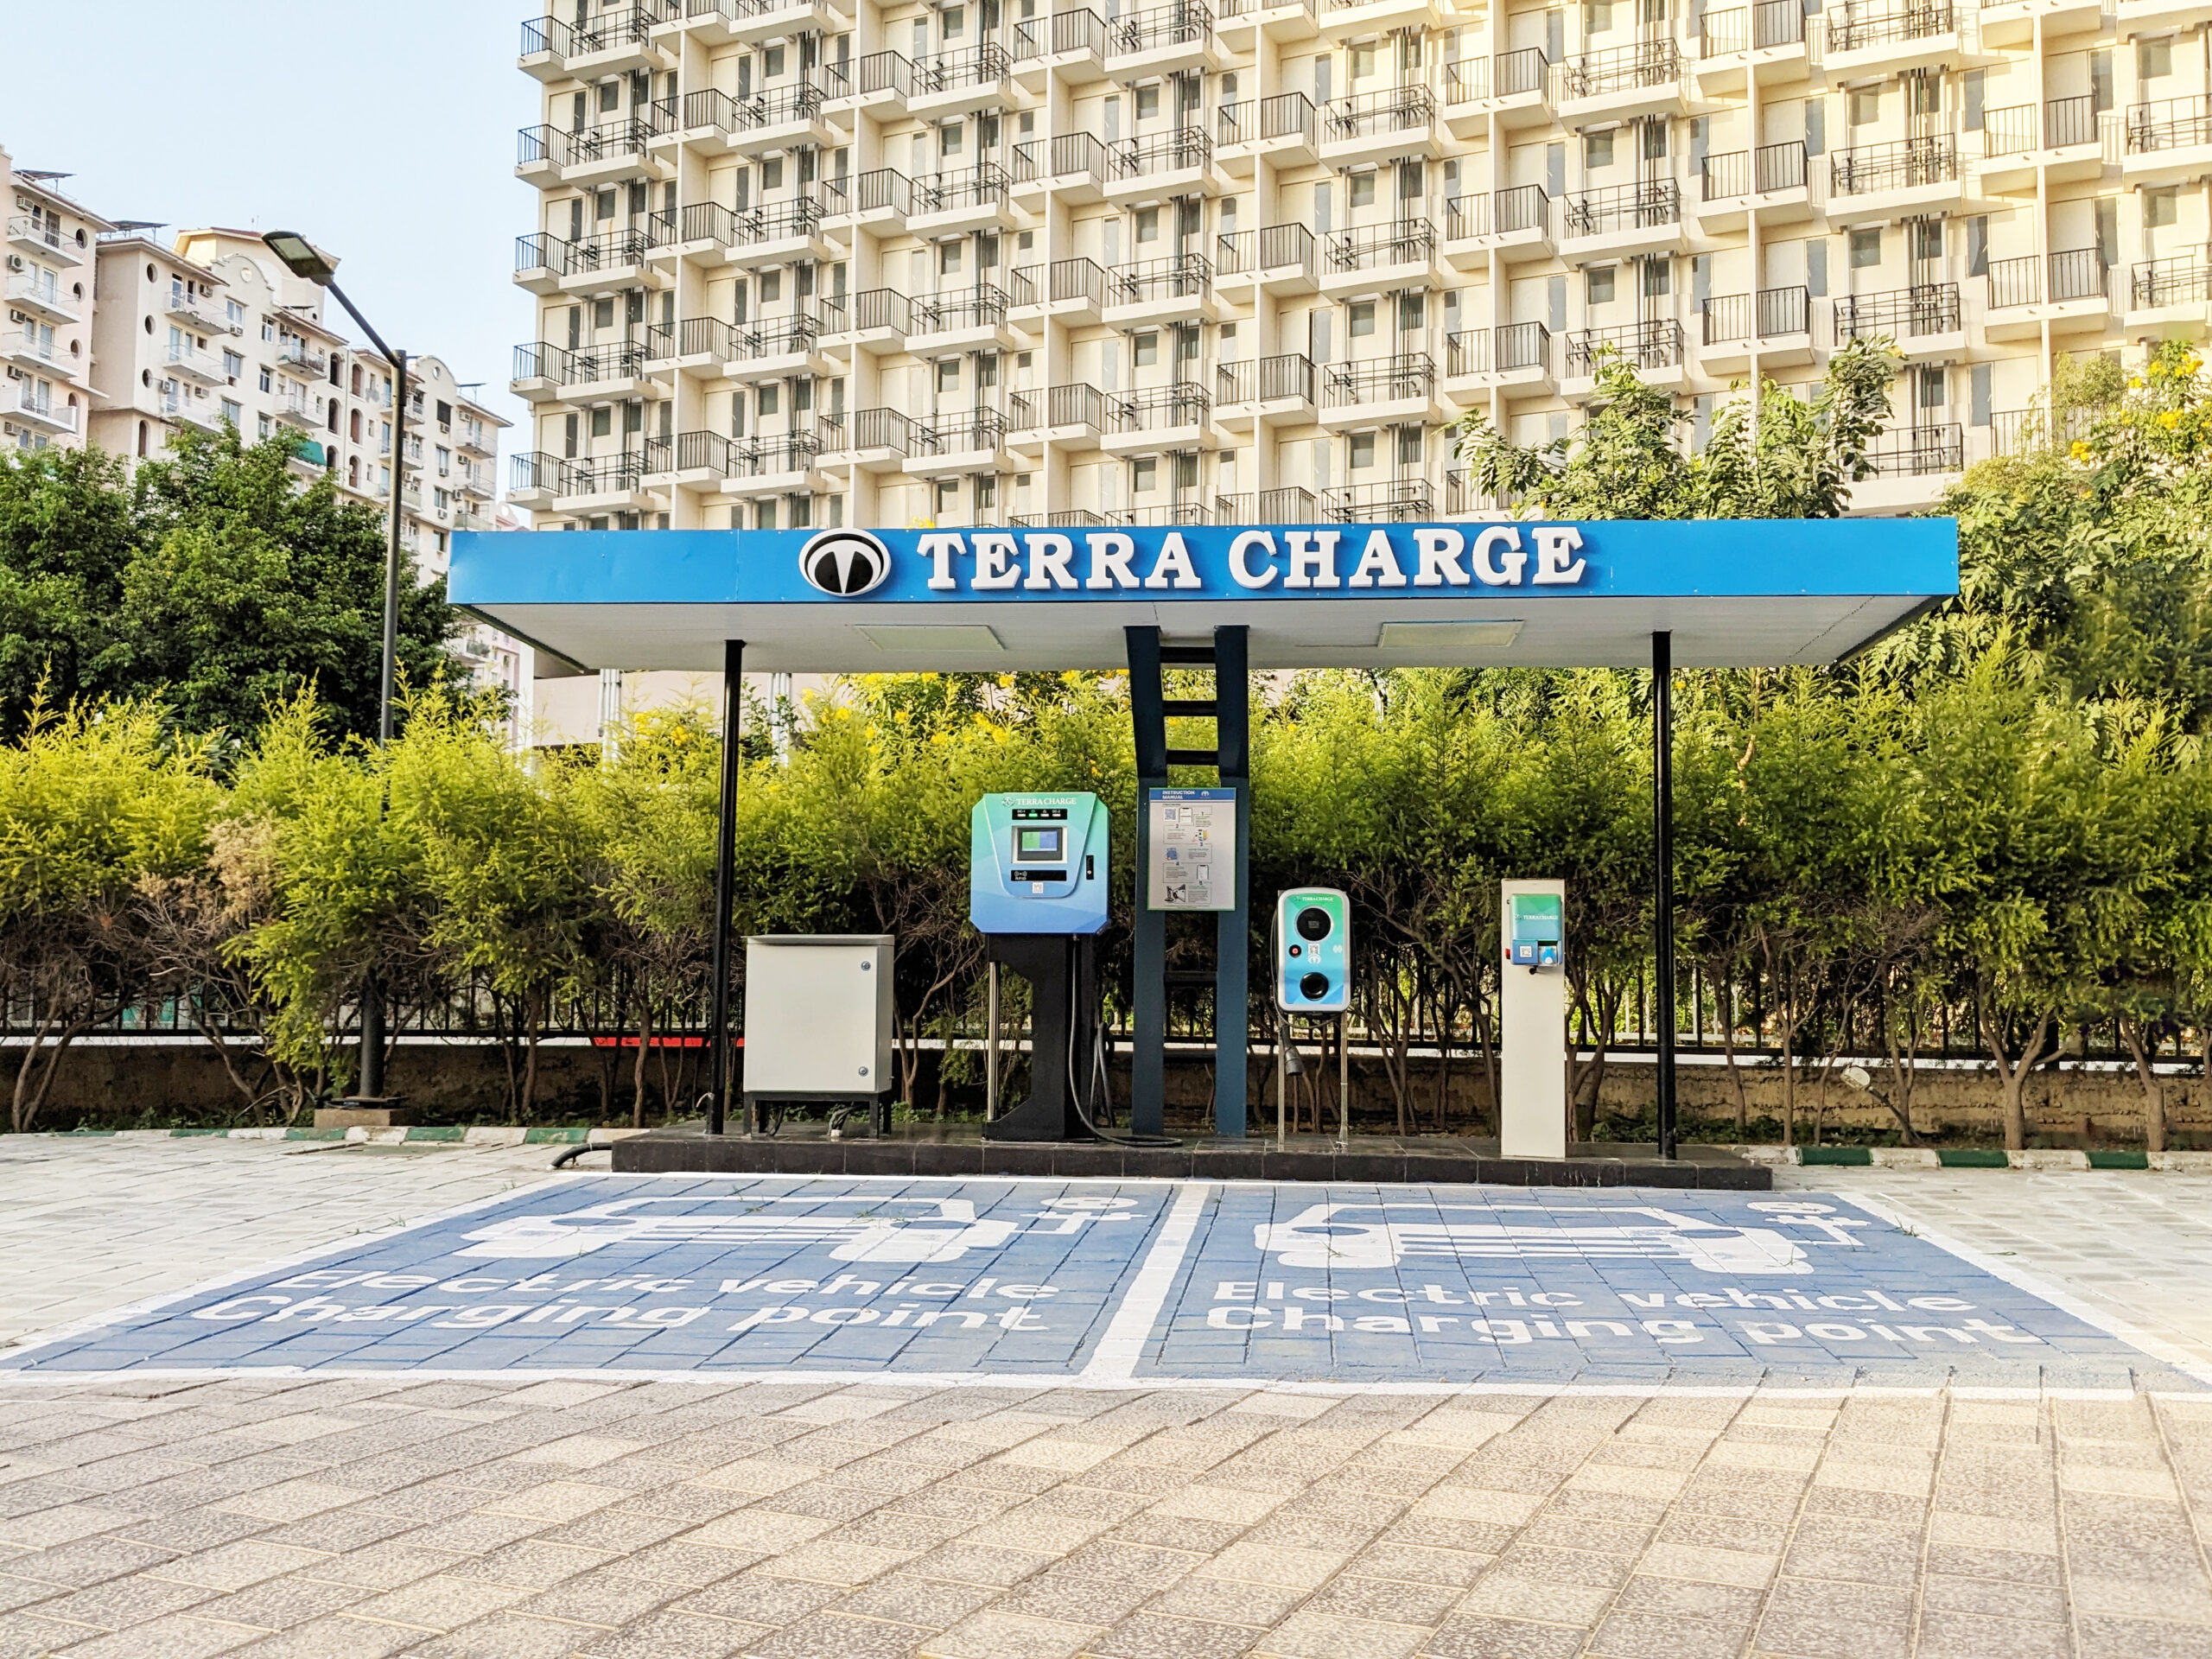 How much is the cost involved in setting up an EV charging station?